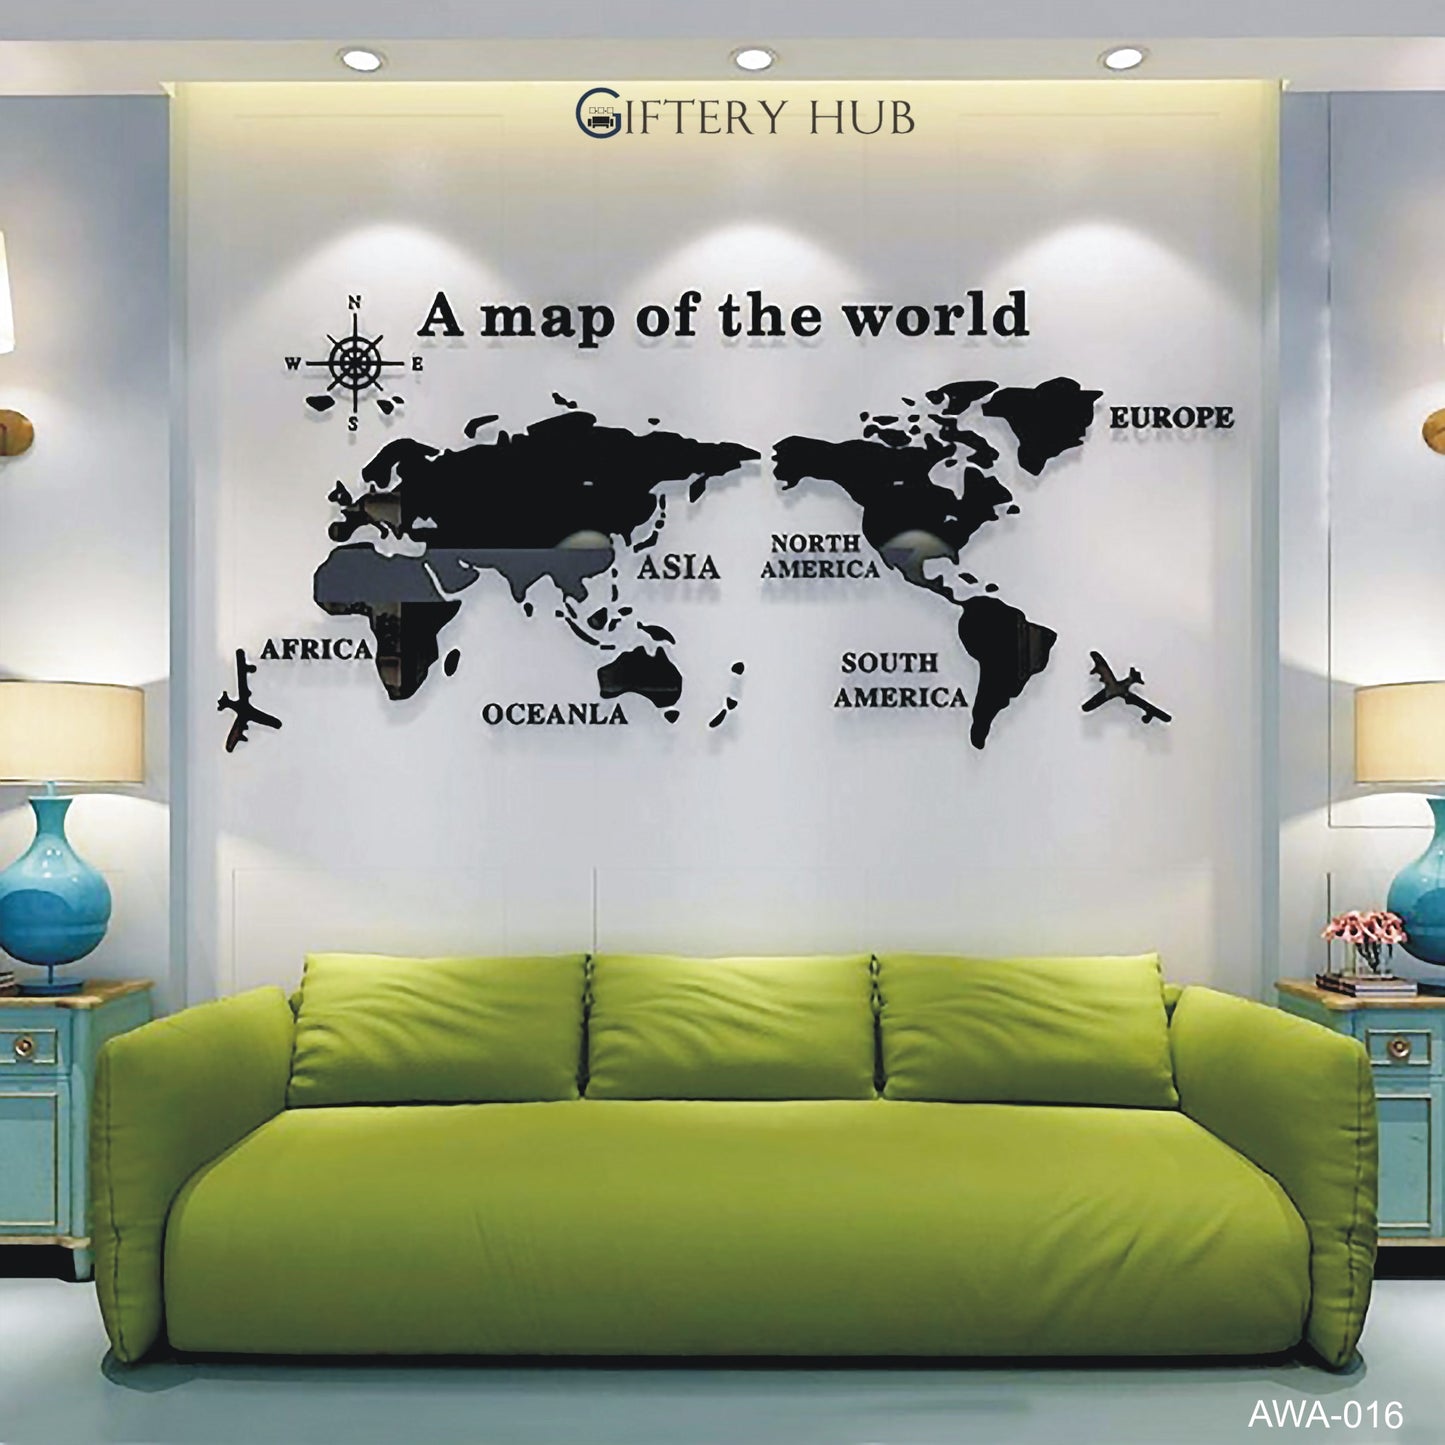 New Arrival 3D World Map for office decor - AWA-016